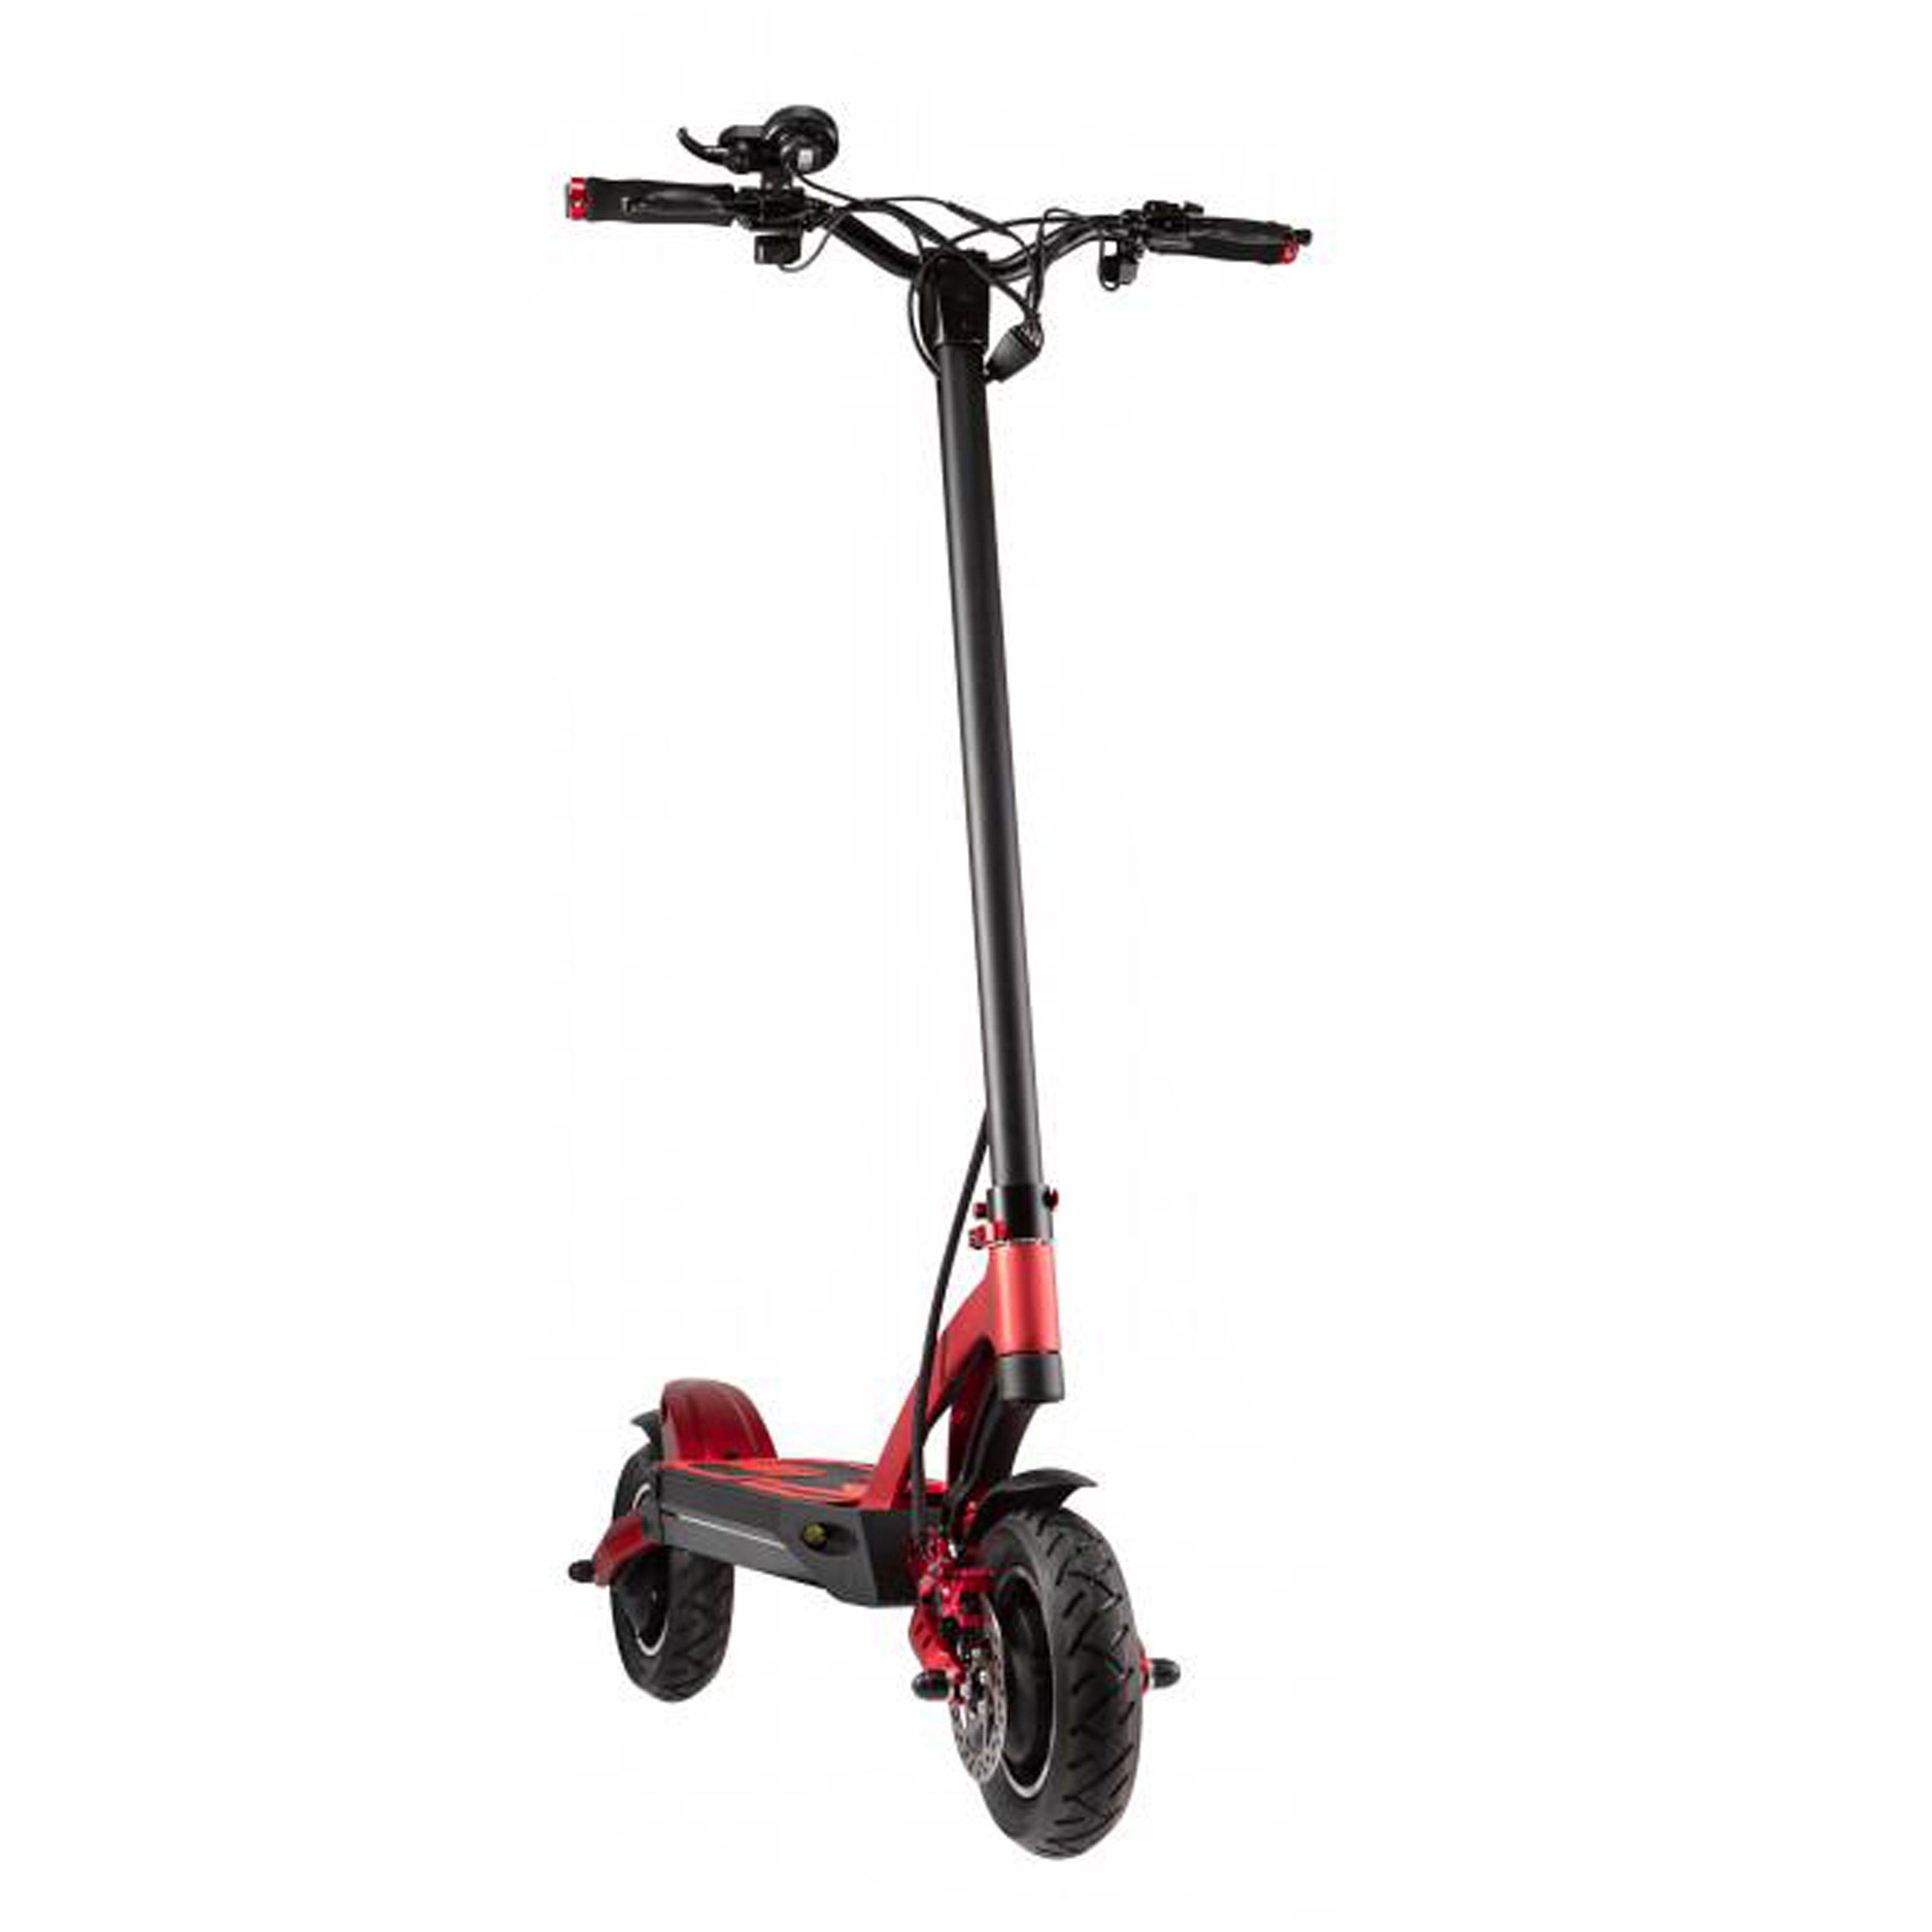 Kaabo Mantis 10 Lite (Kaabo Mantis Lite) Electric Scooter – Red